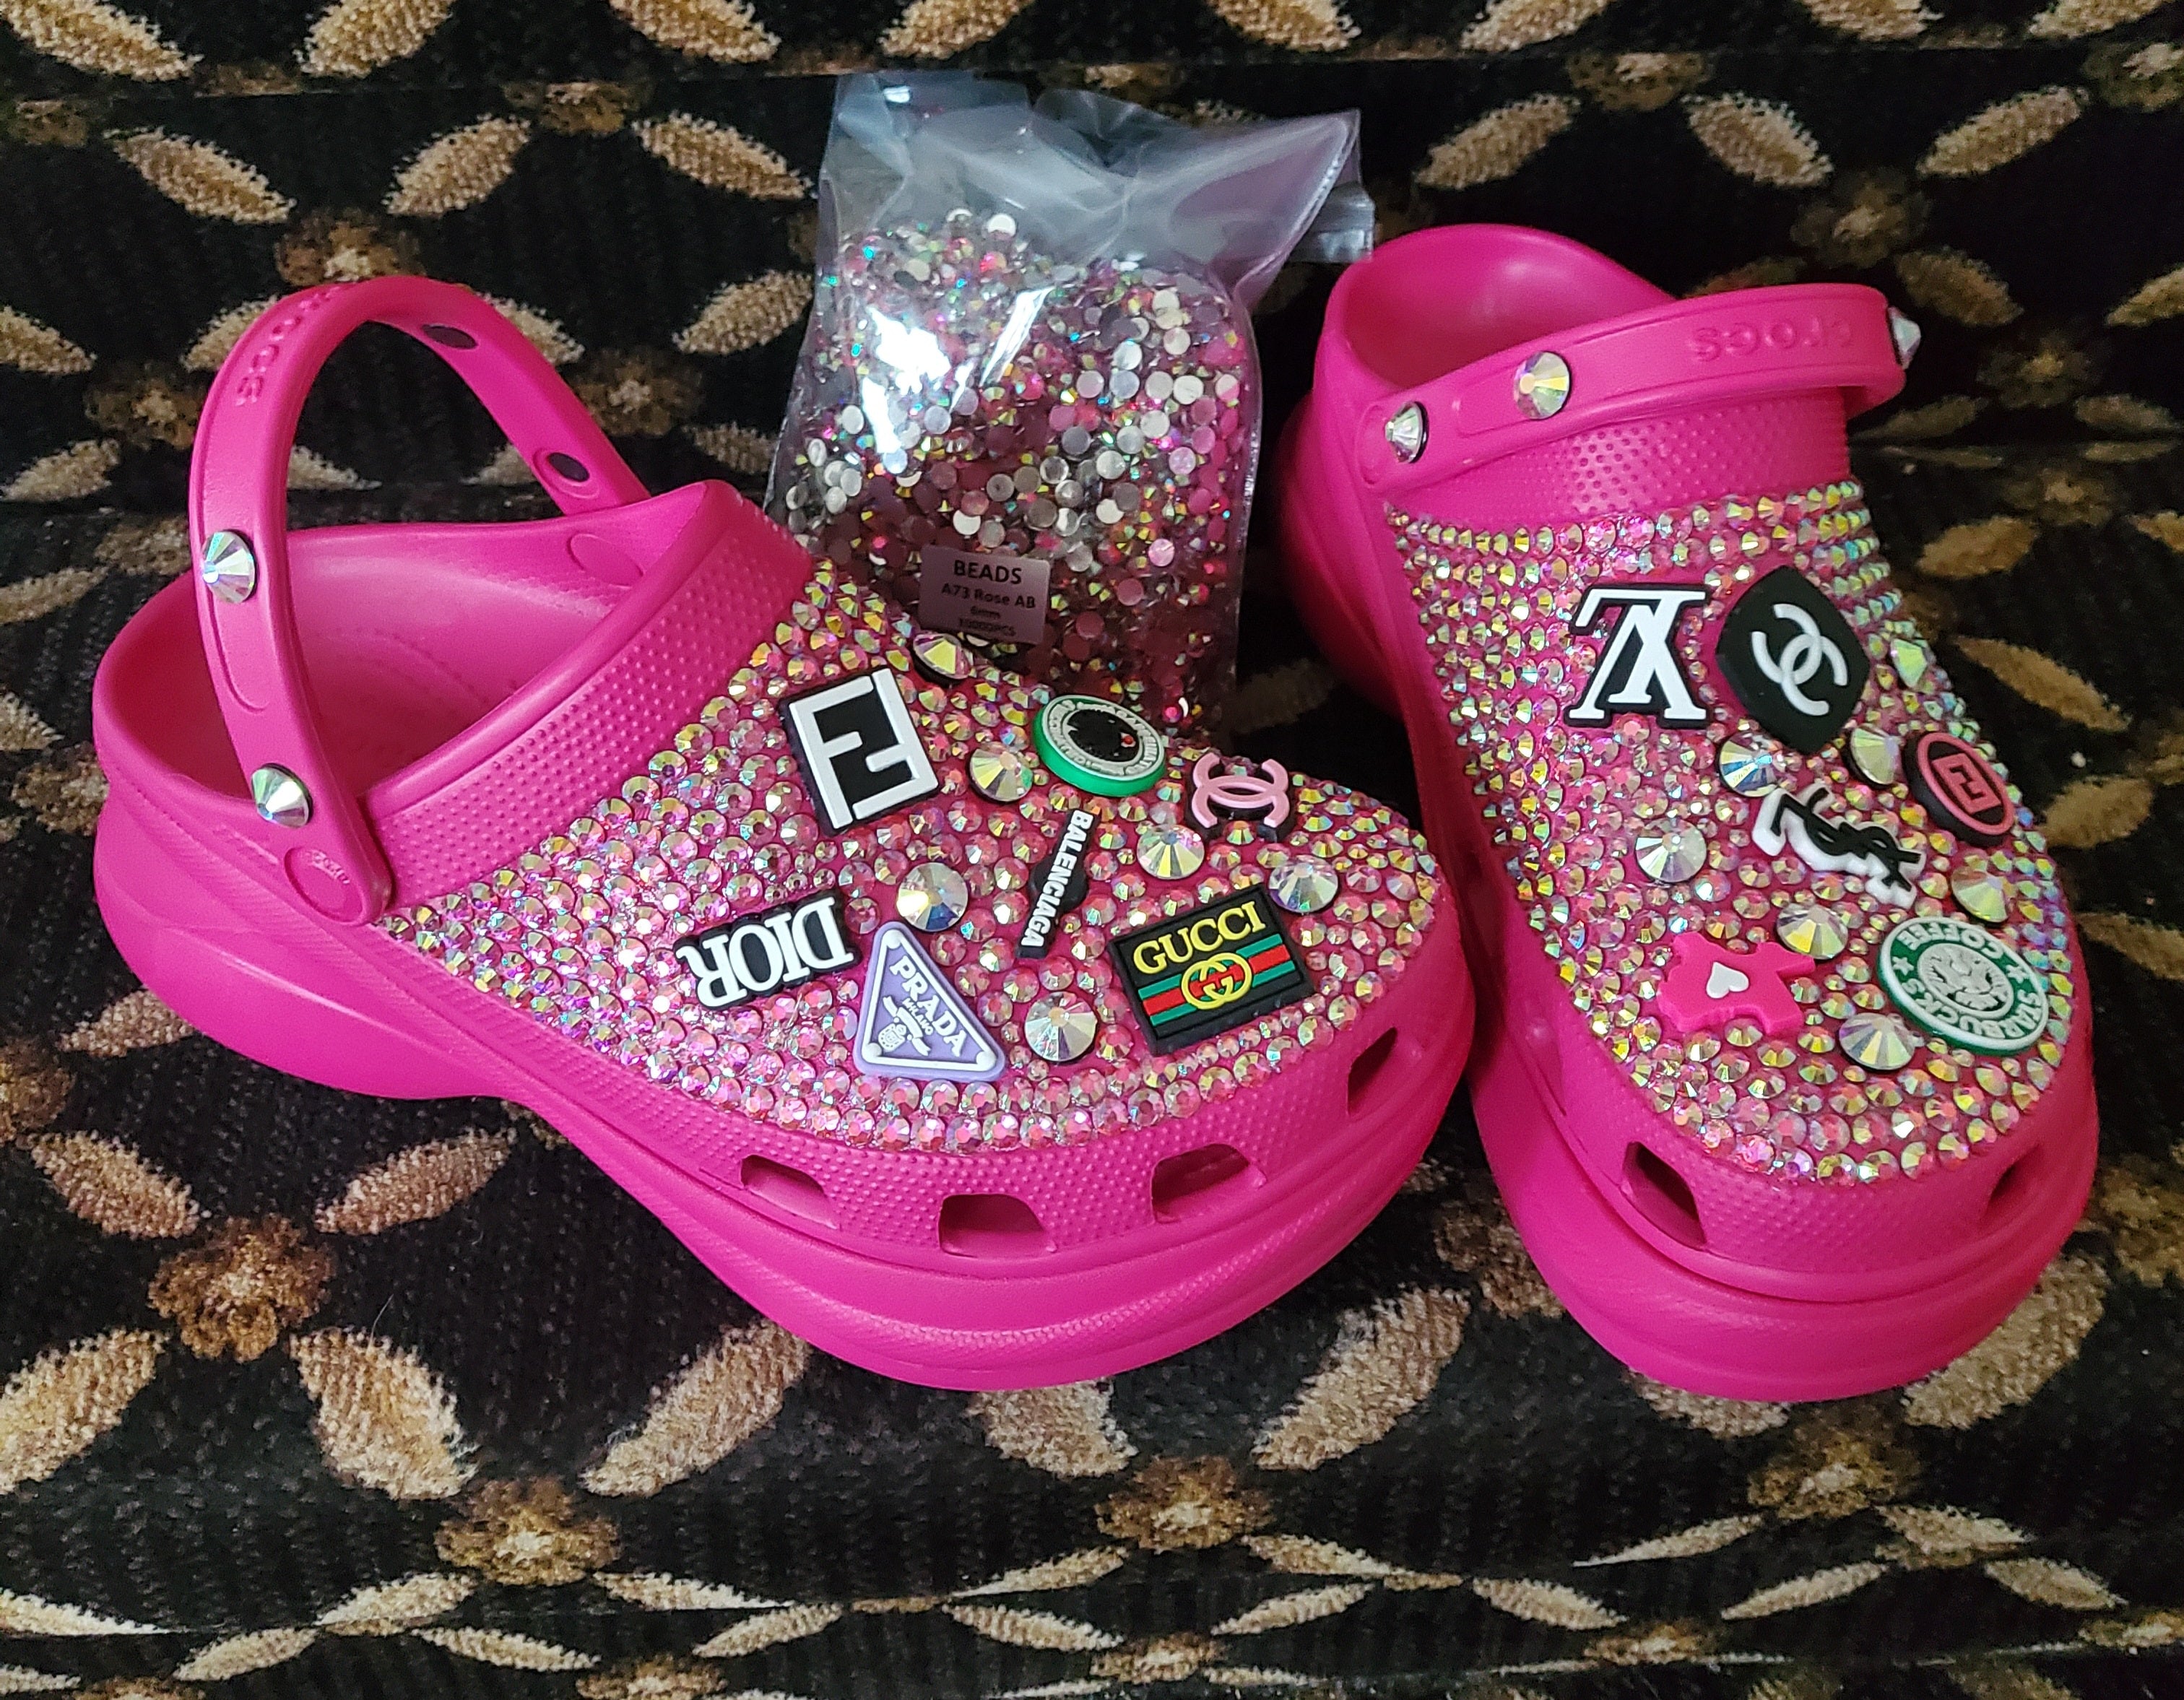 Rhinestone shoe charms for crocs for adults bling Macao